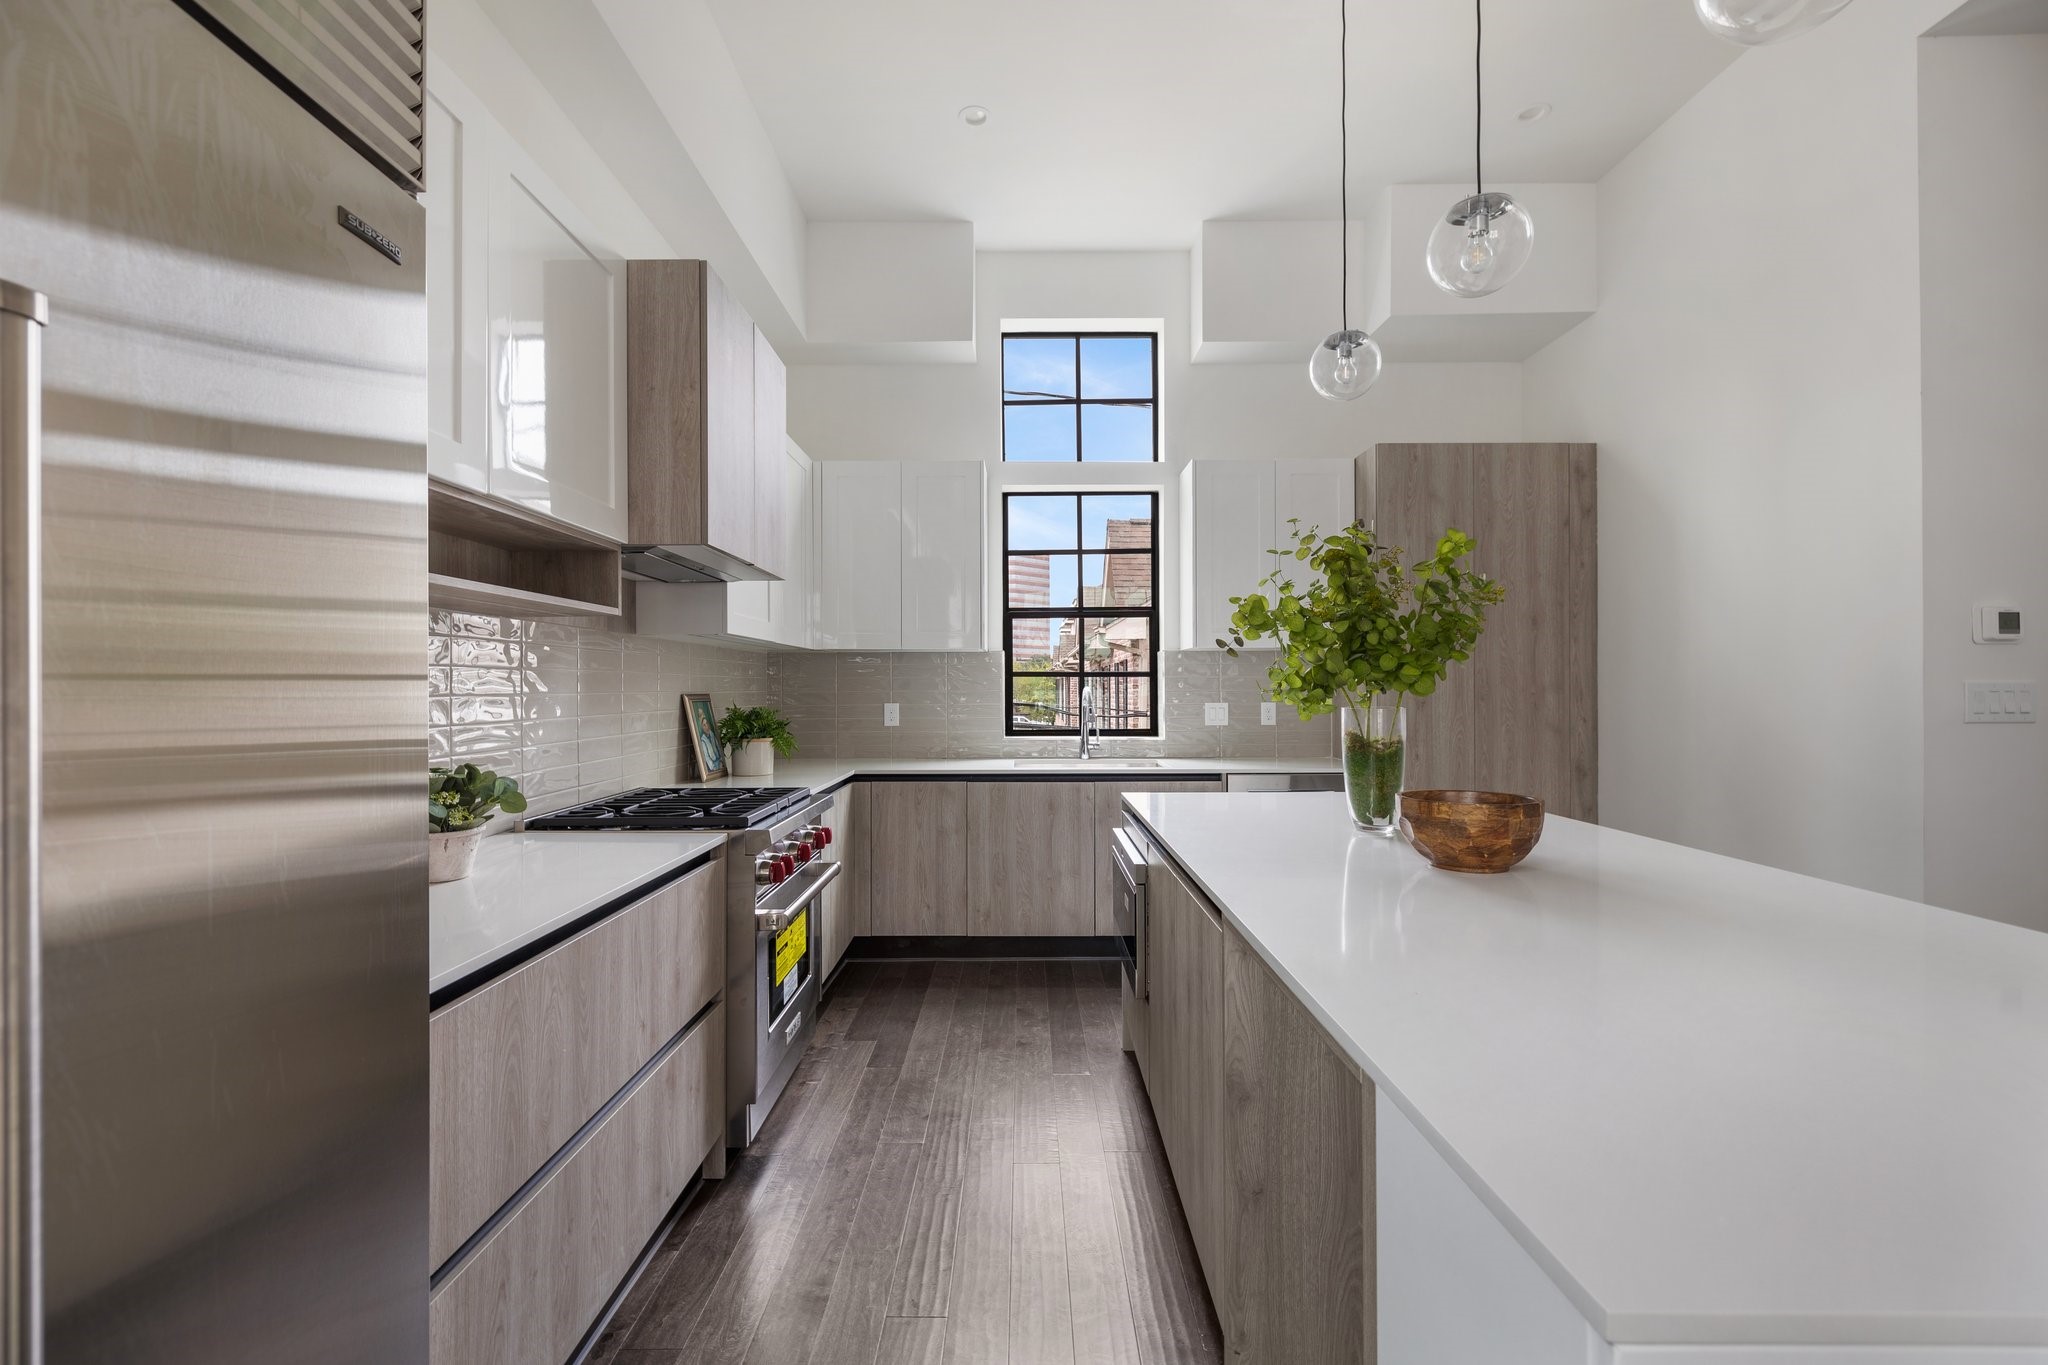 Stunning quartz countertops and imported Contemporary Cabinetry by Madeval blend beauty with durability and are illuminated by luxury island pendants and large windows that filter in natural light.